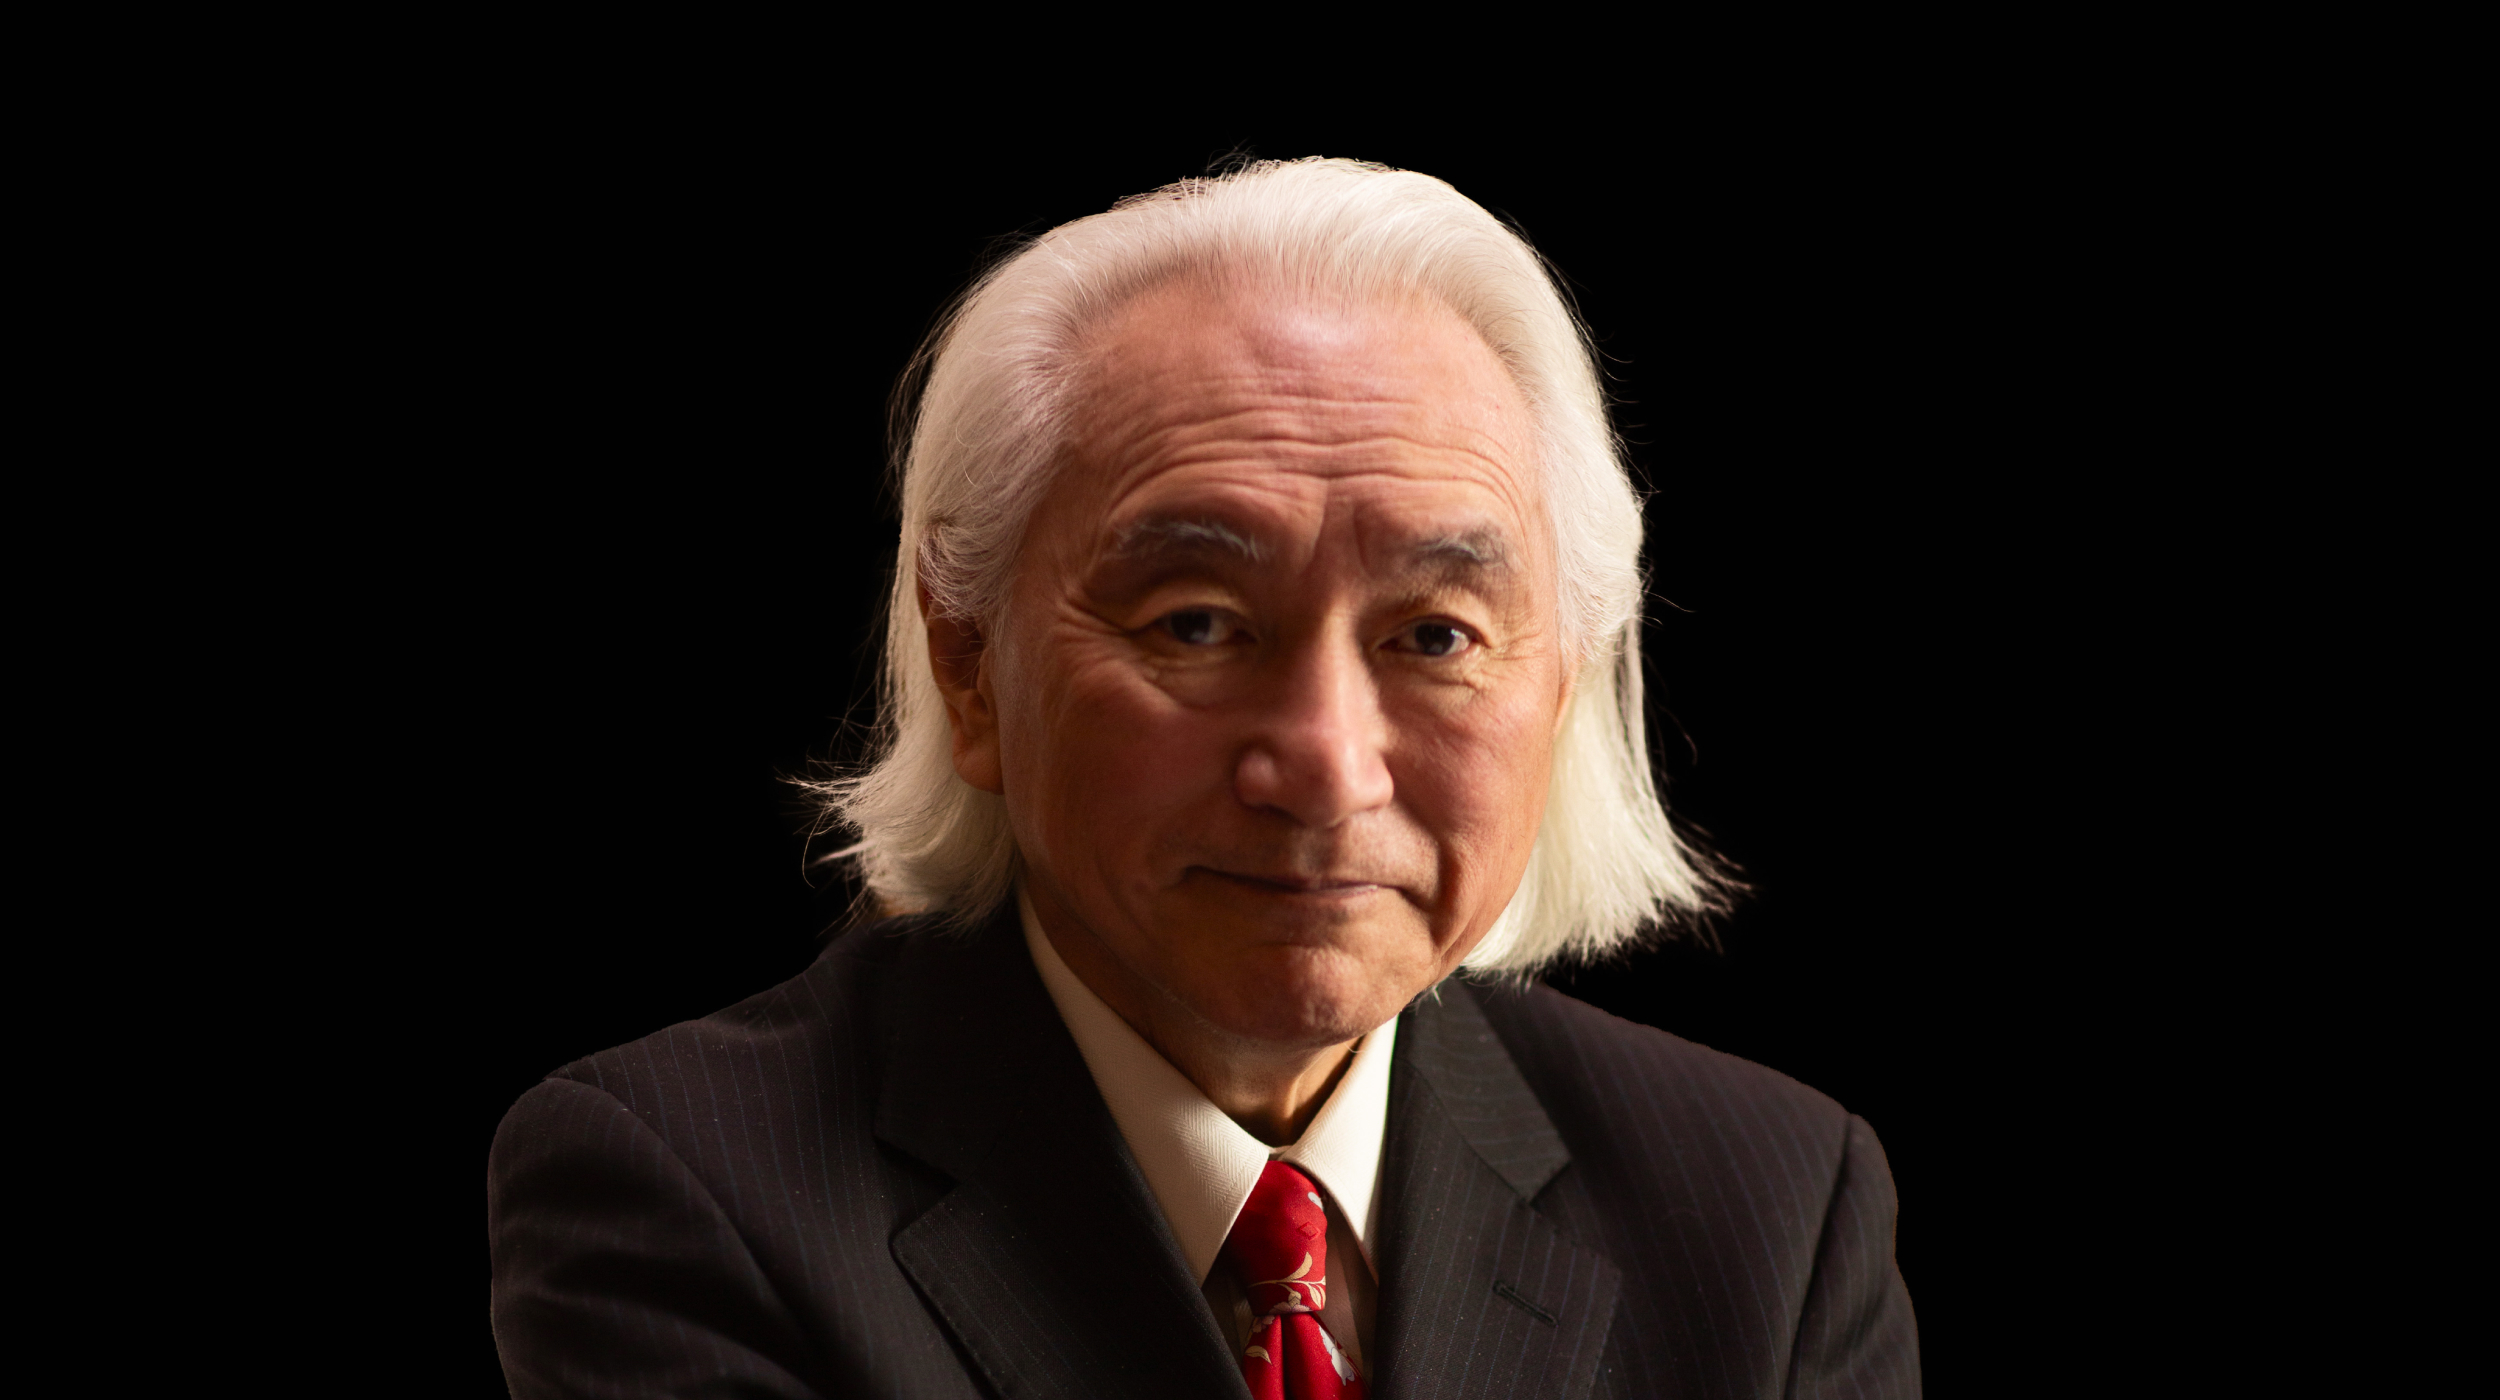 A man in a suit with white hair and a red tie.